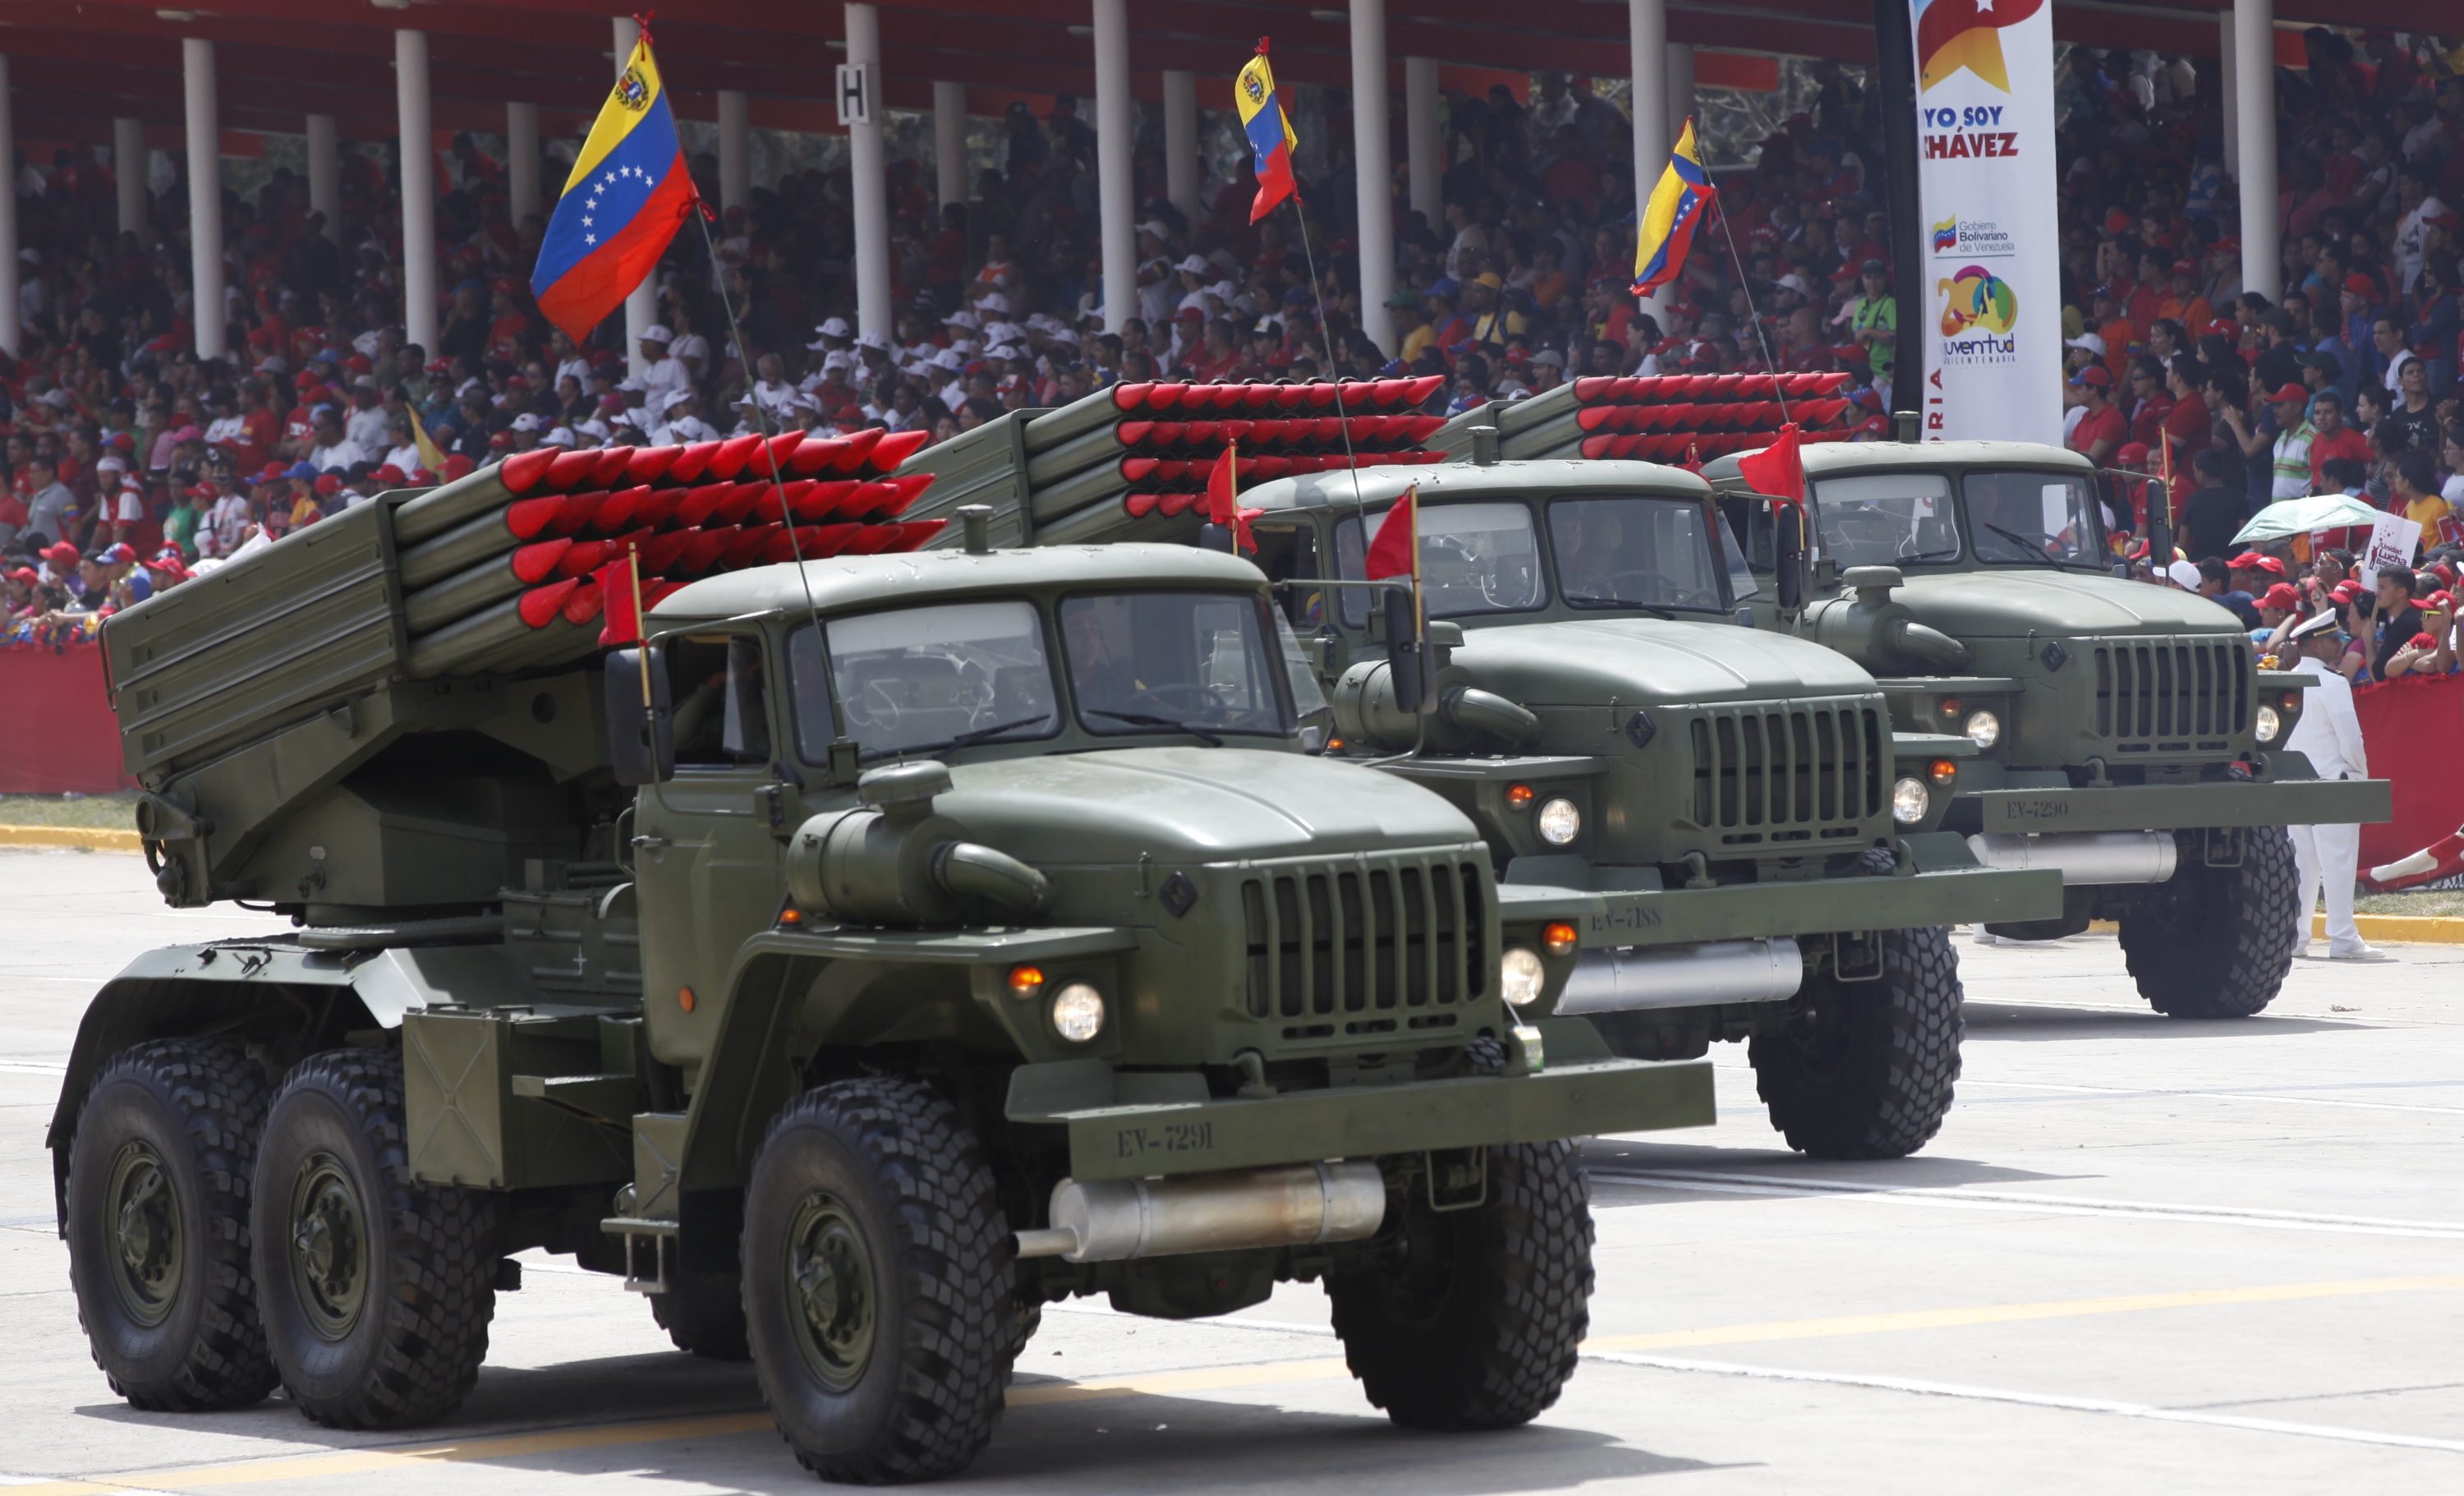 Forget about North Korea, Venezuela is the next major national security crisis